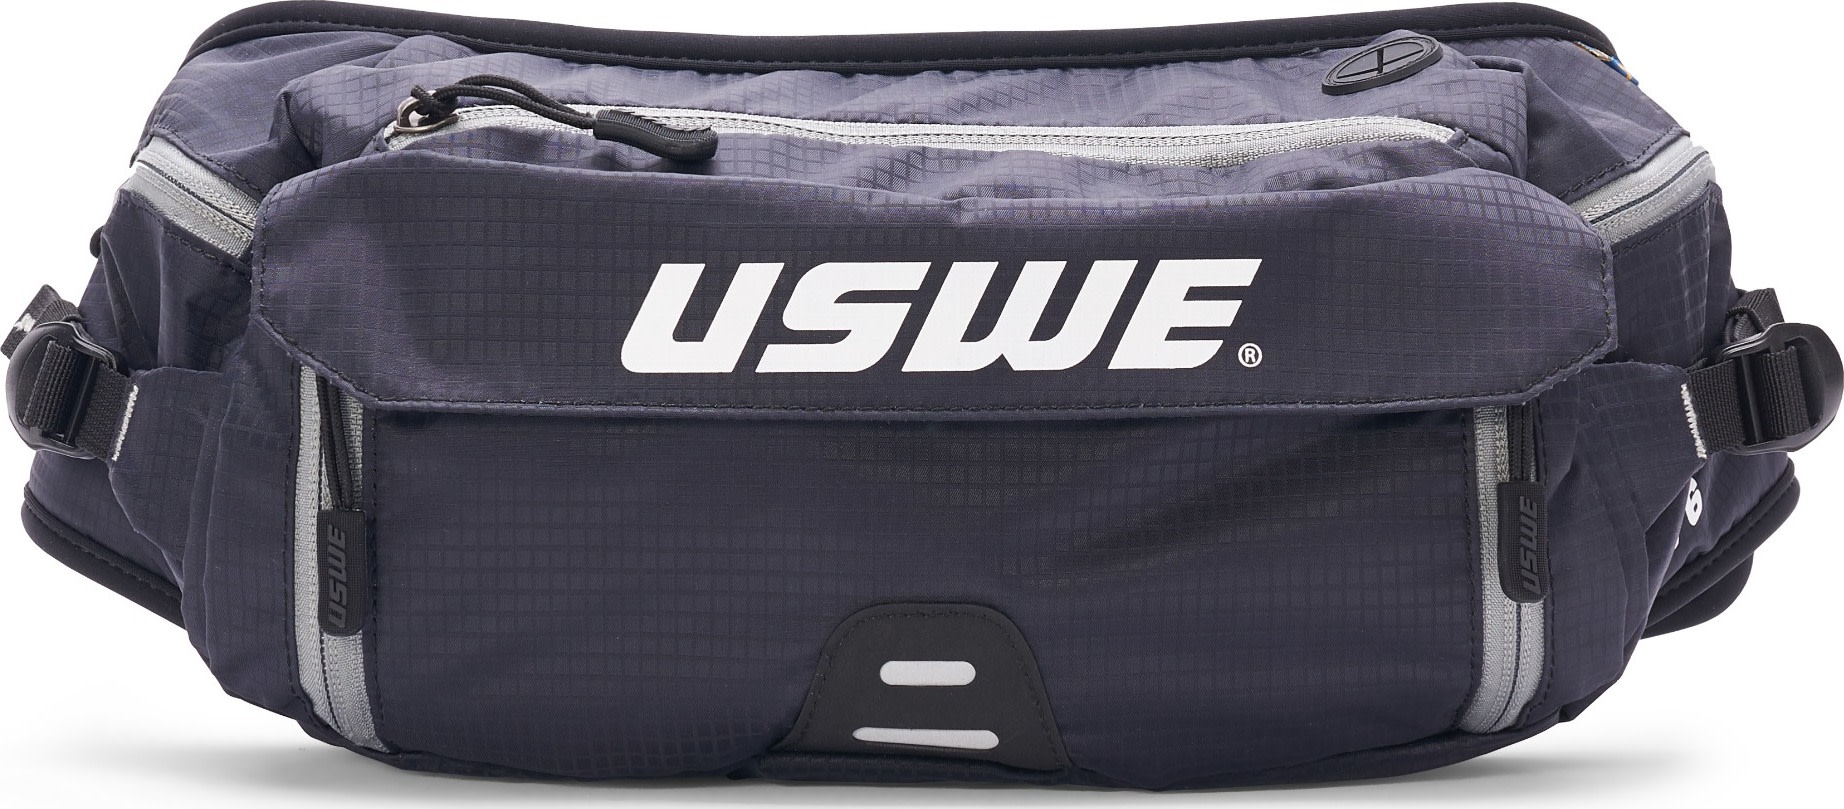 USWE Zulo 6L Winter Hydration Waist Pack Carbon Black